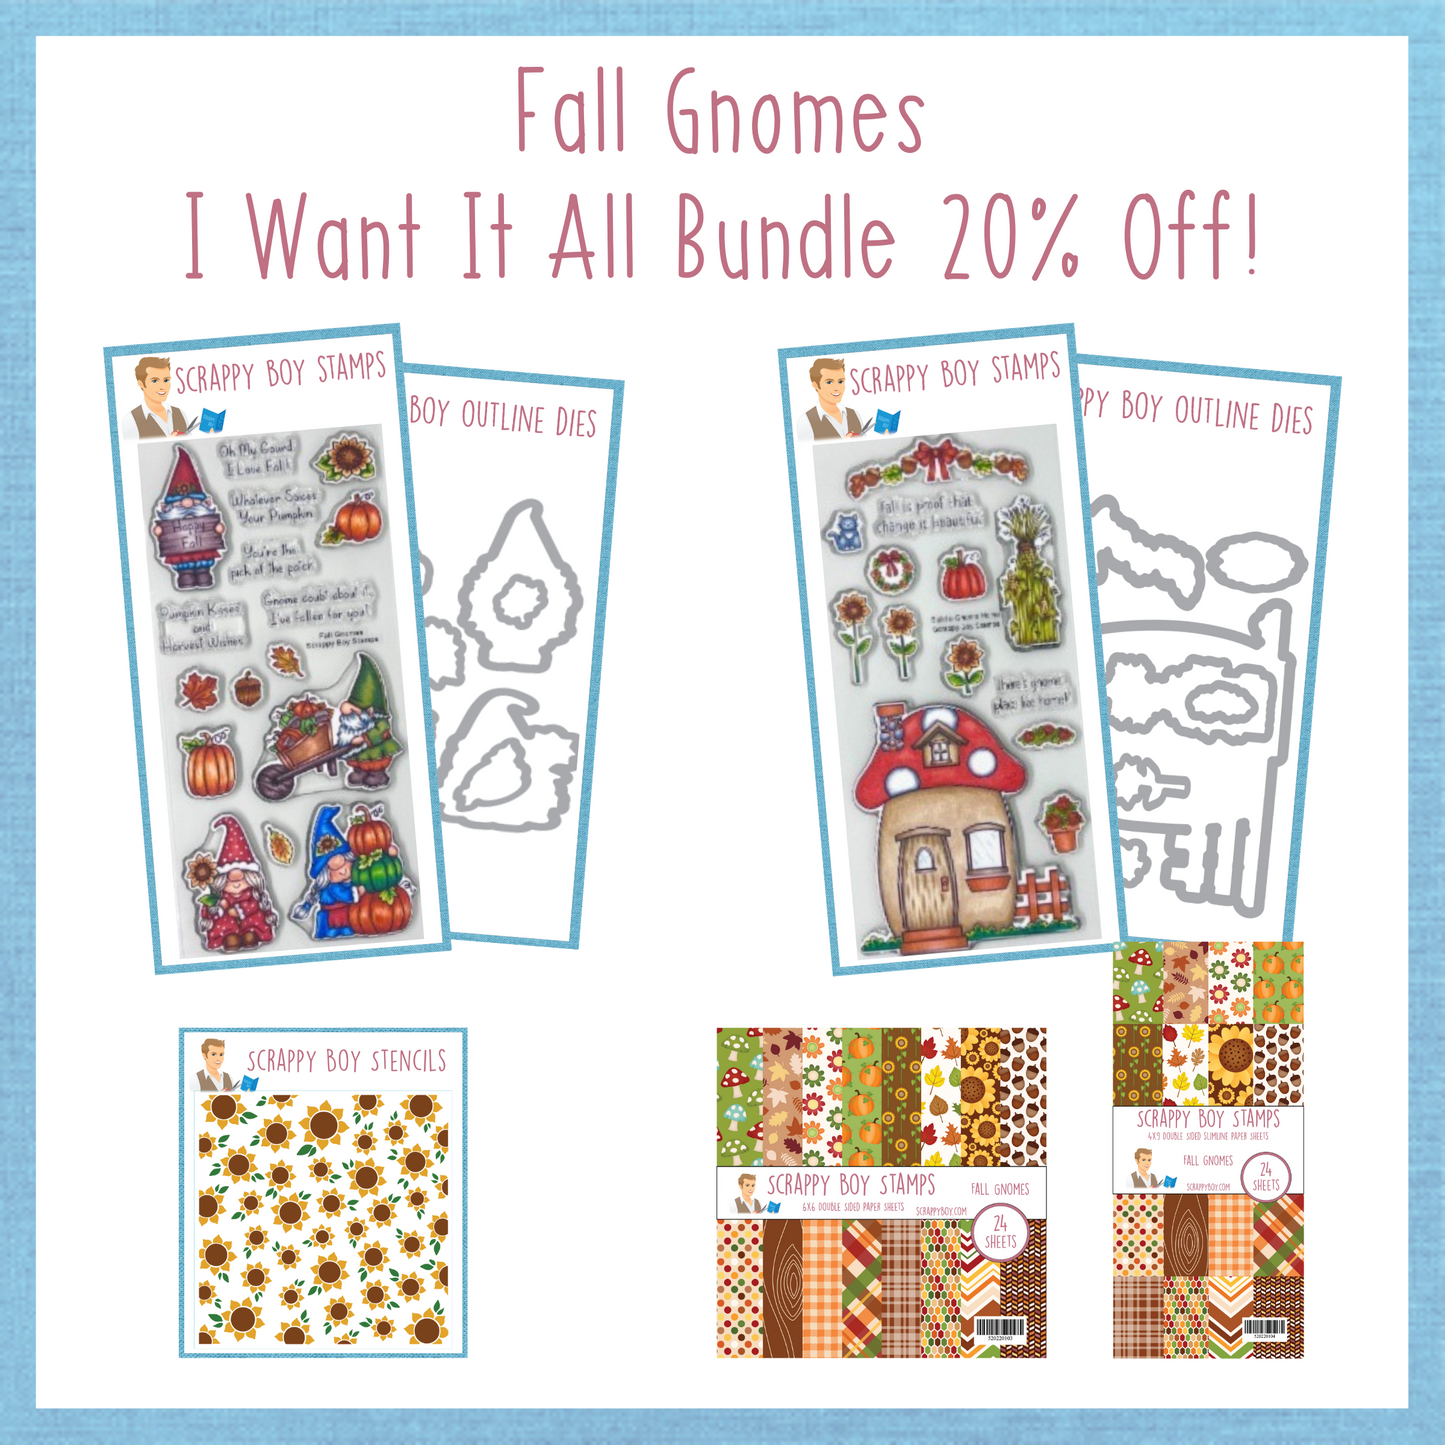 I Want It All Bundle - Fall Gnomes Release scrappyboystamps